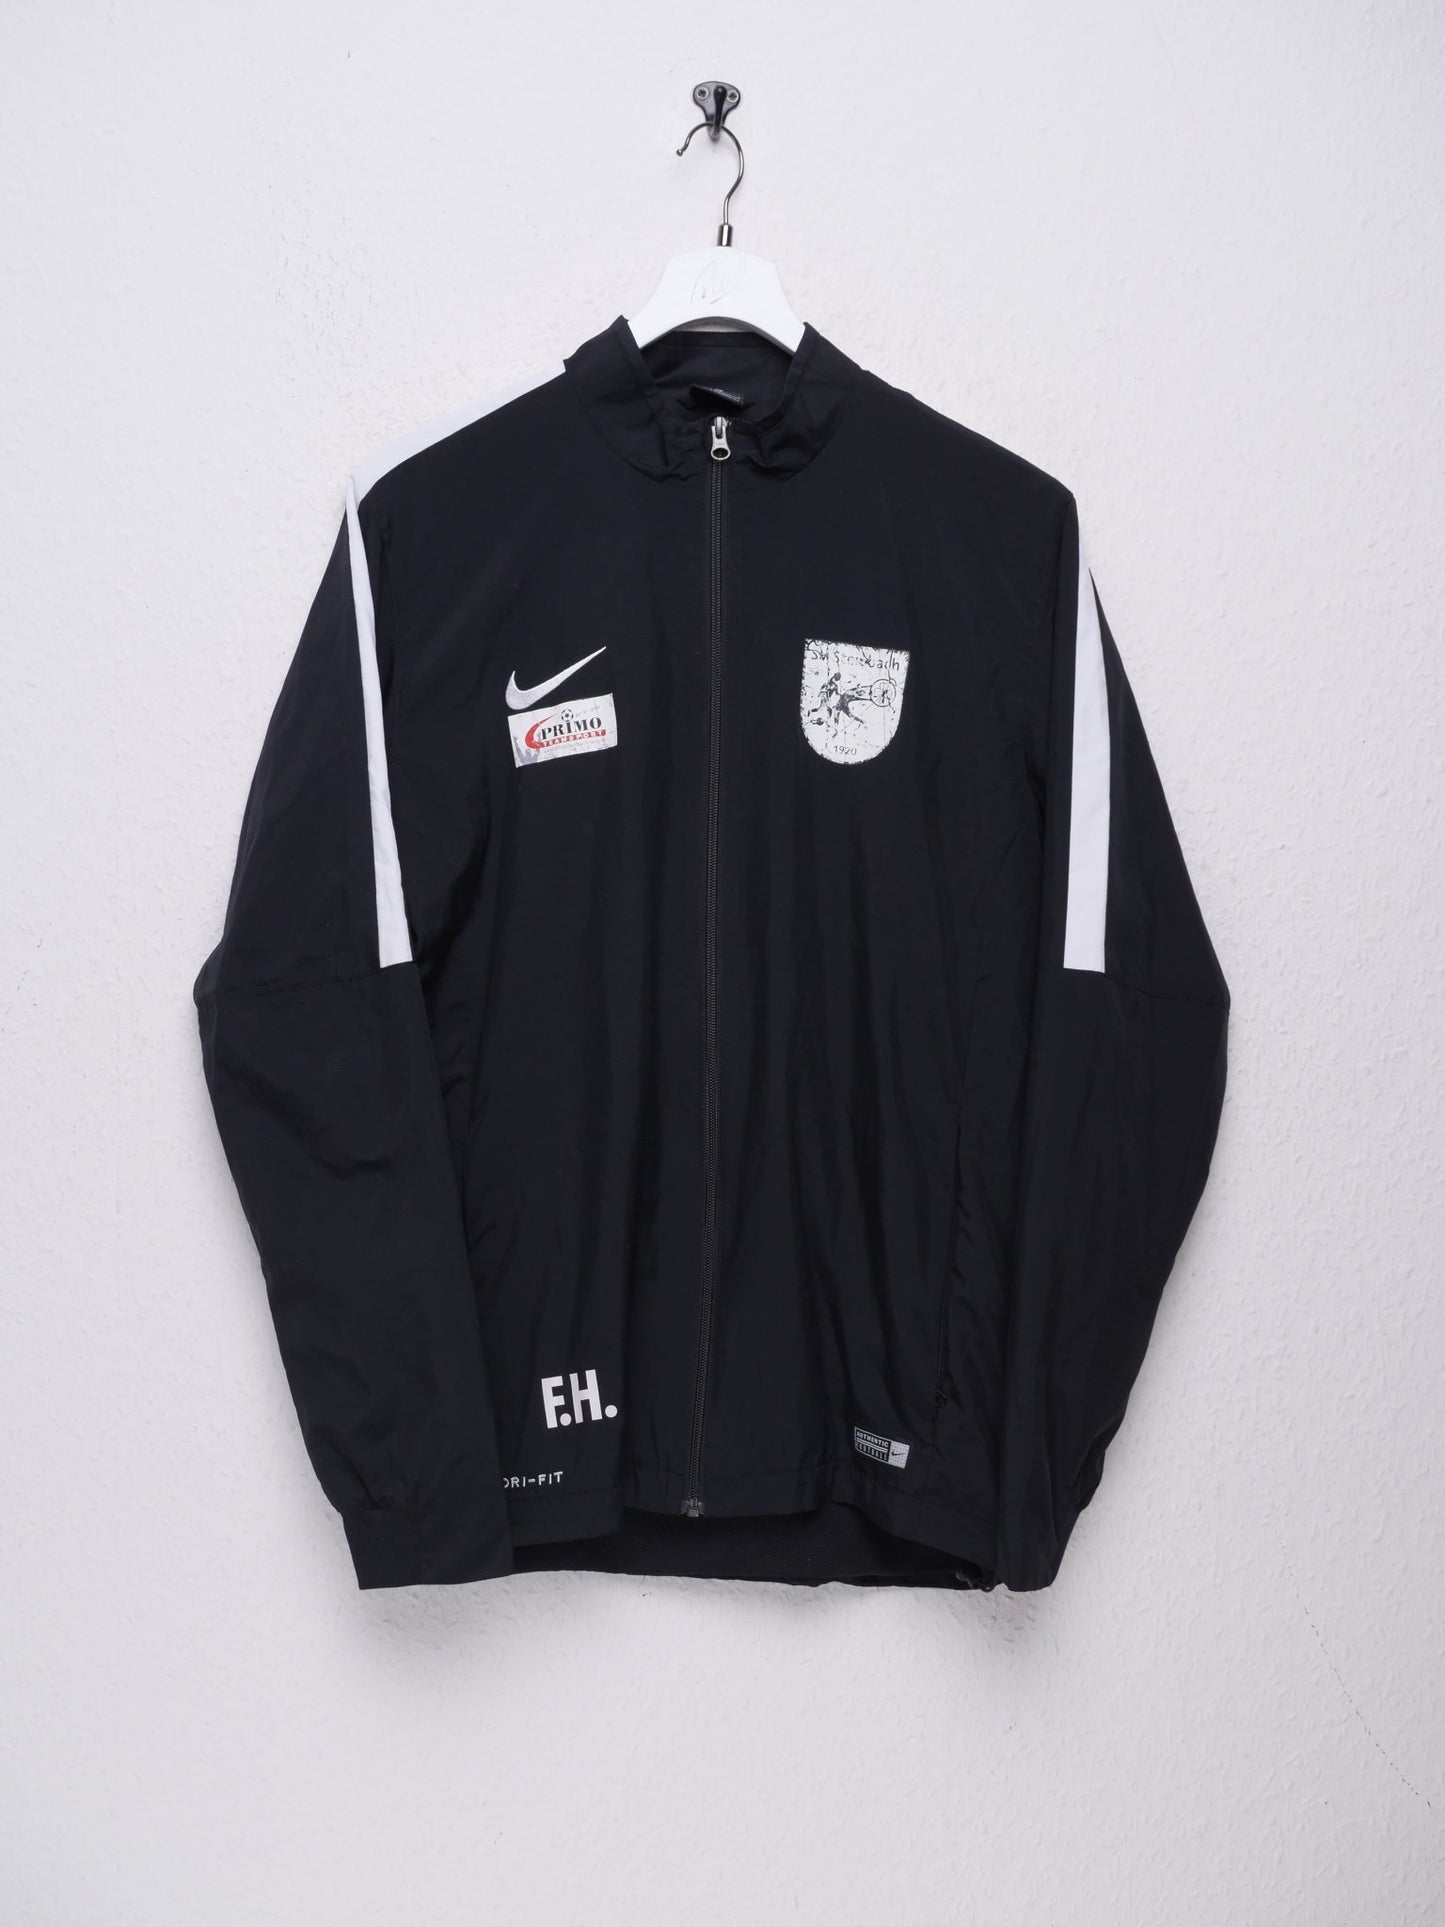 Nike embroidered Swoosh Soccer two toned Track Jacket - Peeces